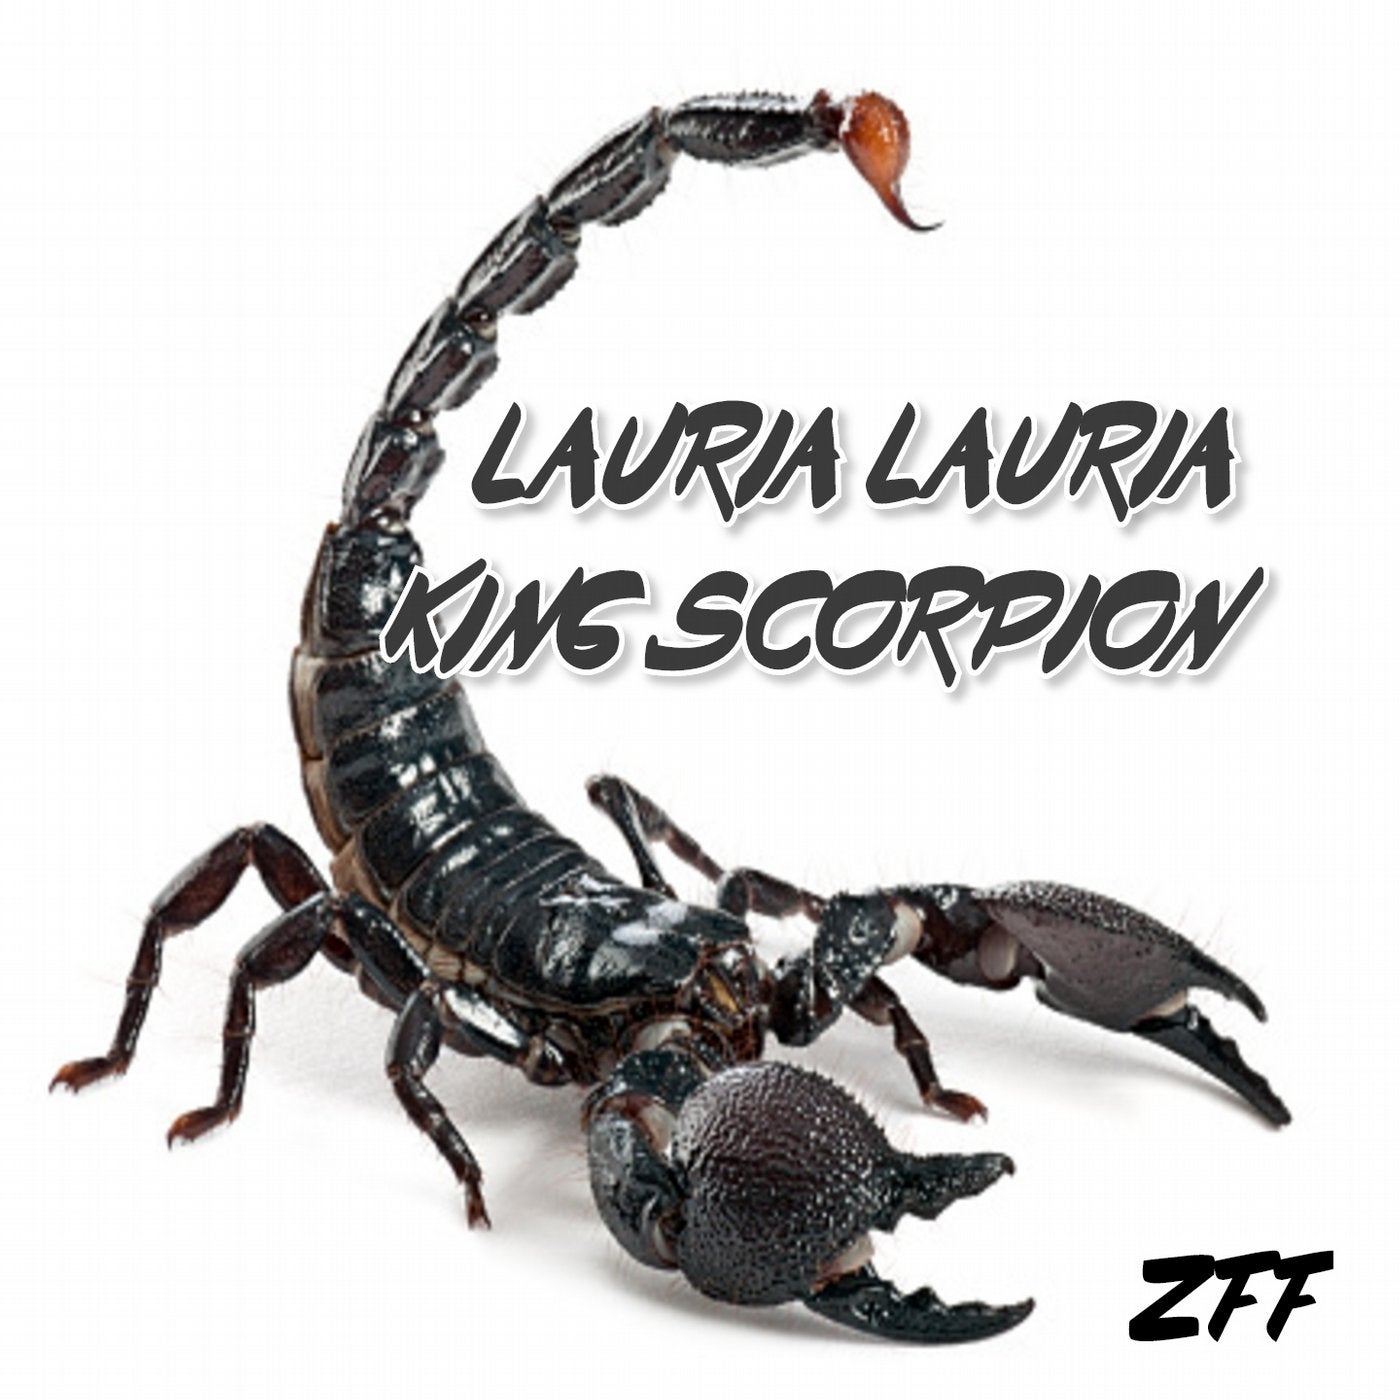 King Scorpion (Original Mix) by Lauria Lauria on Beatport